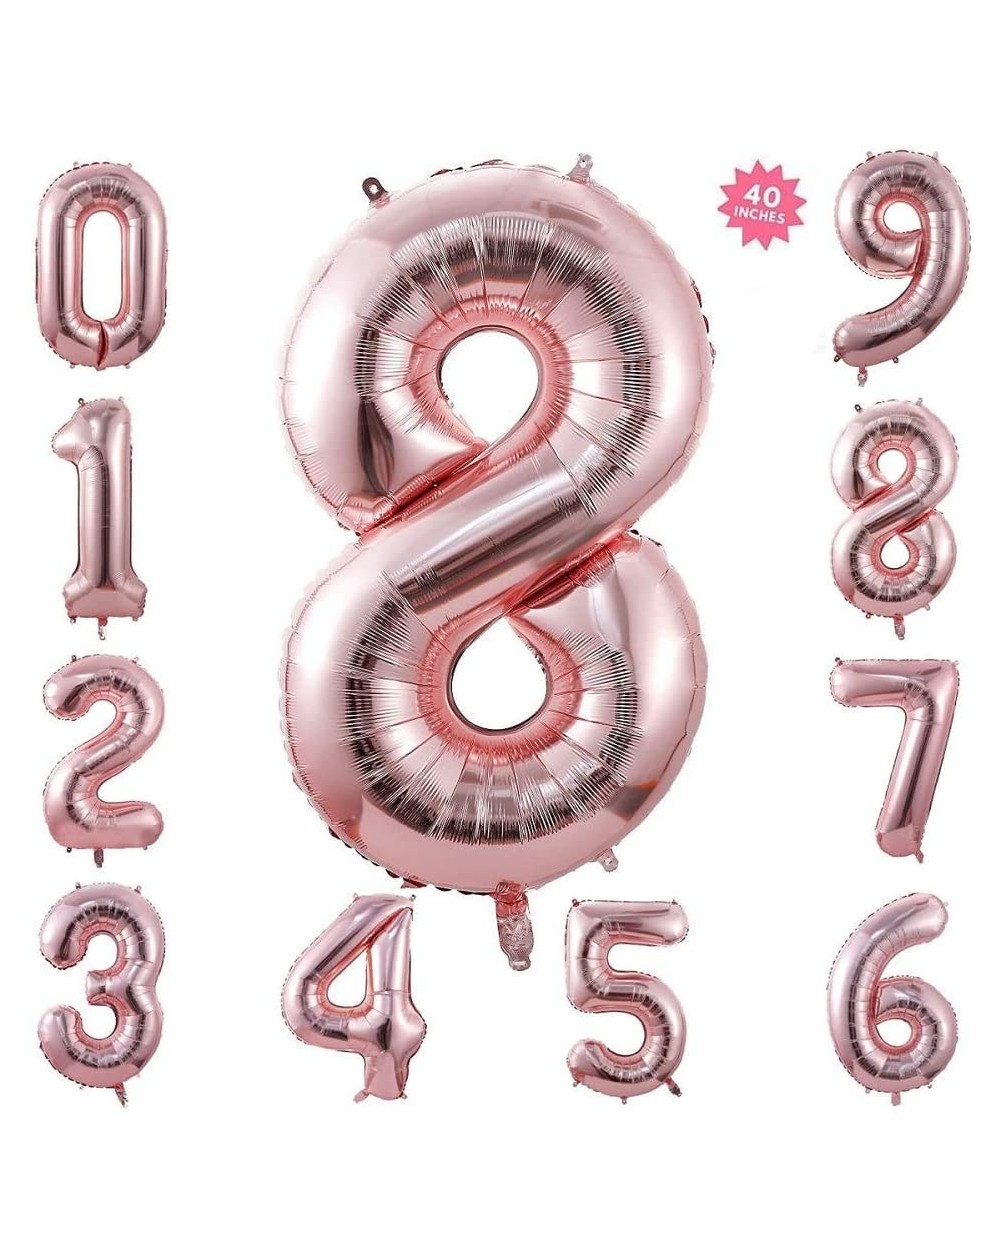 Balloons 40 Inch Rose Gold Jumbo Digital Number Balloons 8 Huge Giant Balloons Foil Mylar Number Balloons for Birthday Party-...